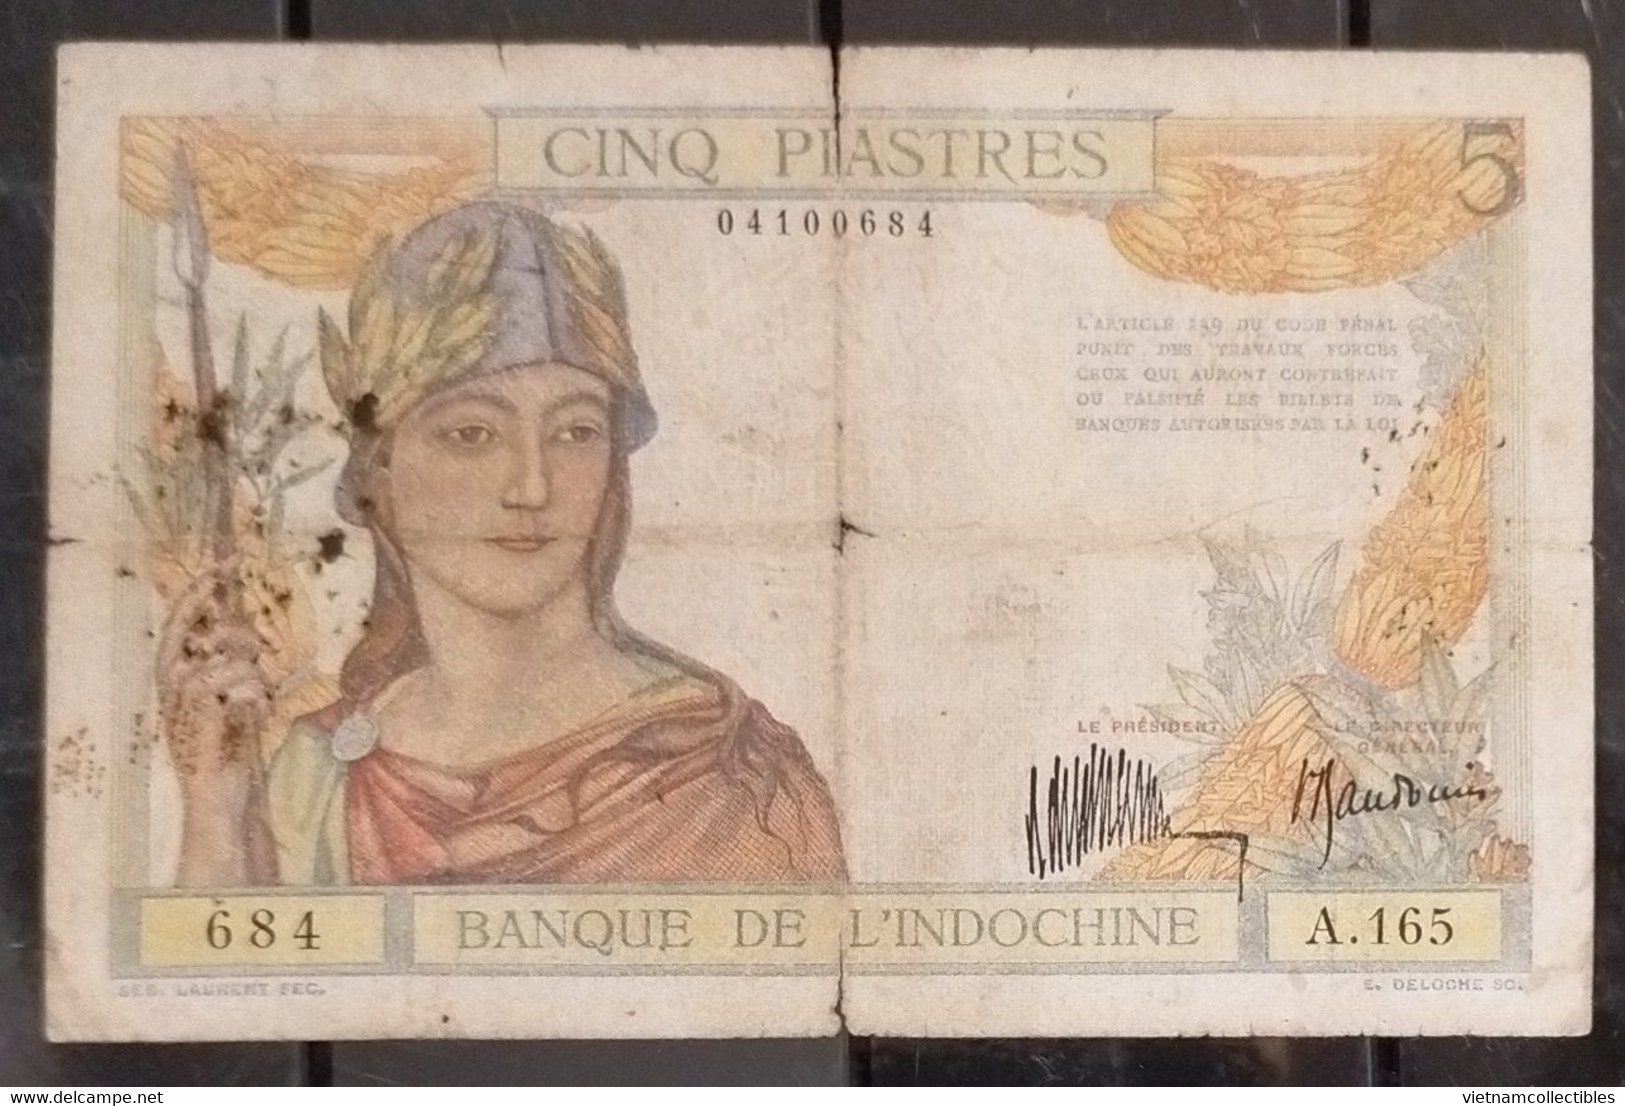 French Indochina Indo China Indochine Laos Vietnam Cambodia 5 Piastres Fine Banknote Note 1932 - Pick # 53a / 2 Photos - Indochine